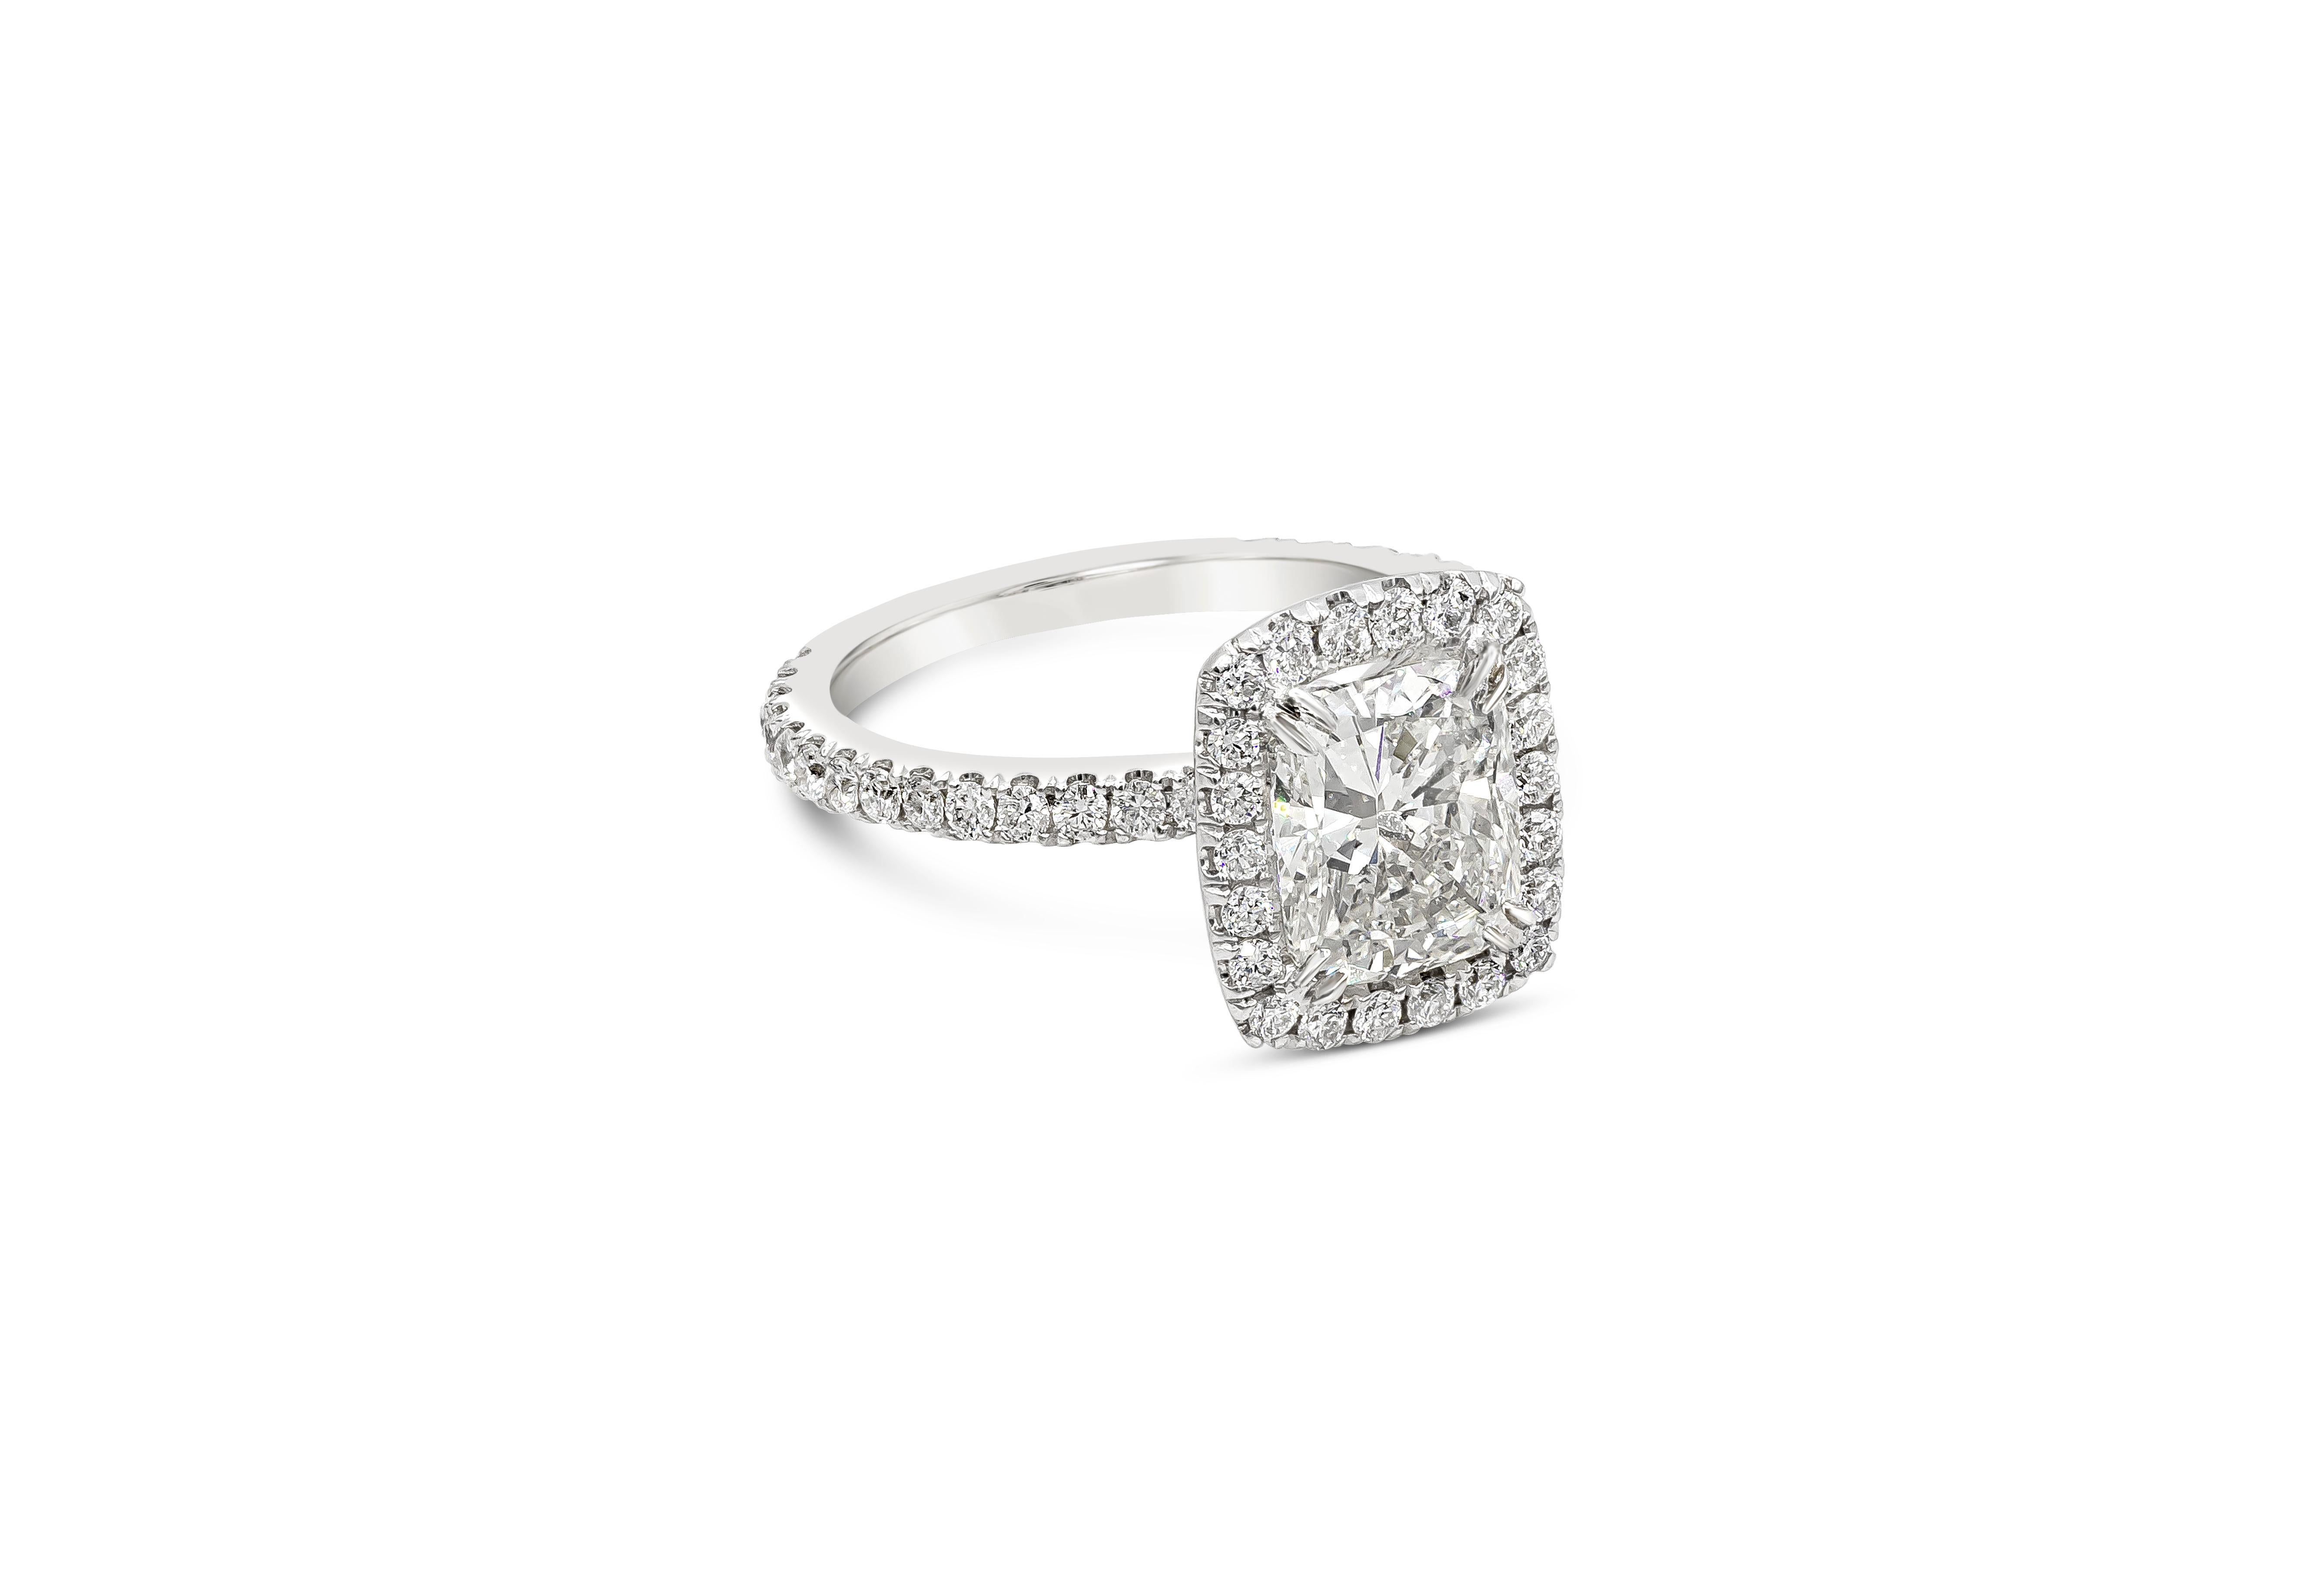 A halo engagement ring style showcasing an elongated cushion cut diamond weighing 2.20 carats, certified by EGL as F color and SI1 in clarity. Surrounded by a single row of brilliant round diamonds in an eight prong seamless halo setting. Shank is